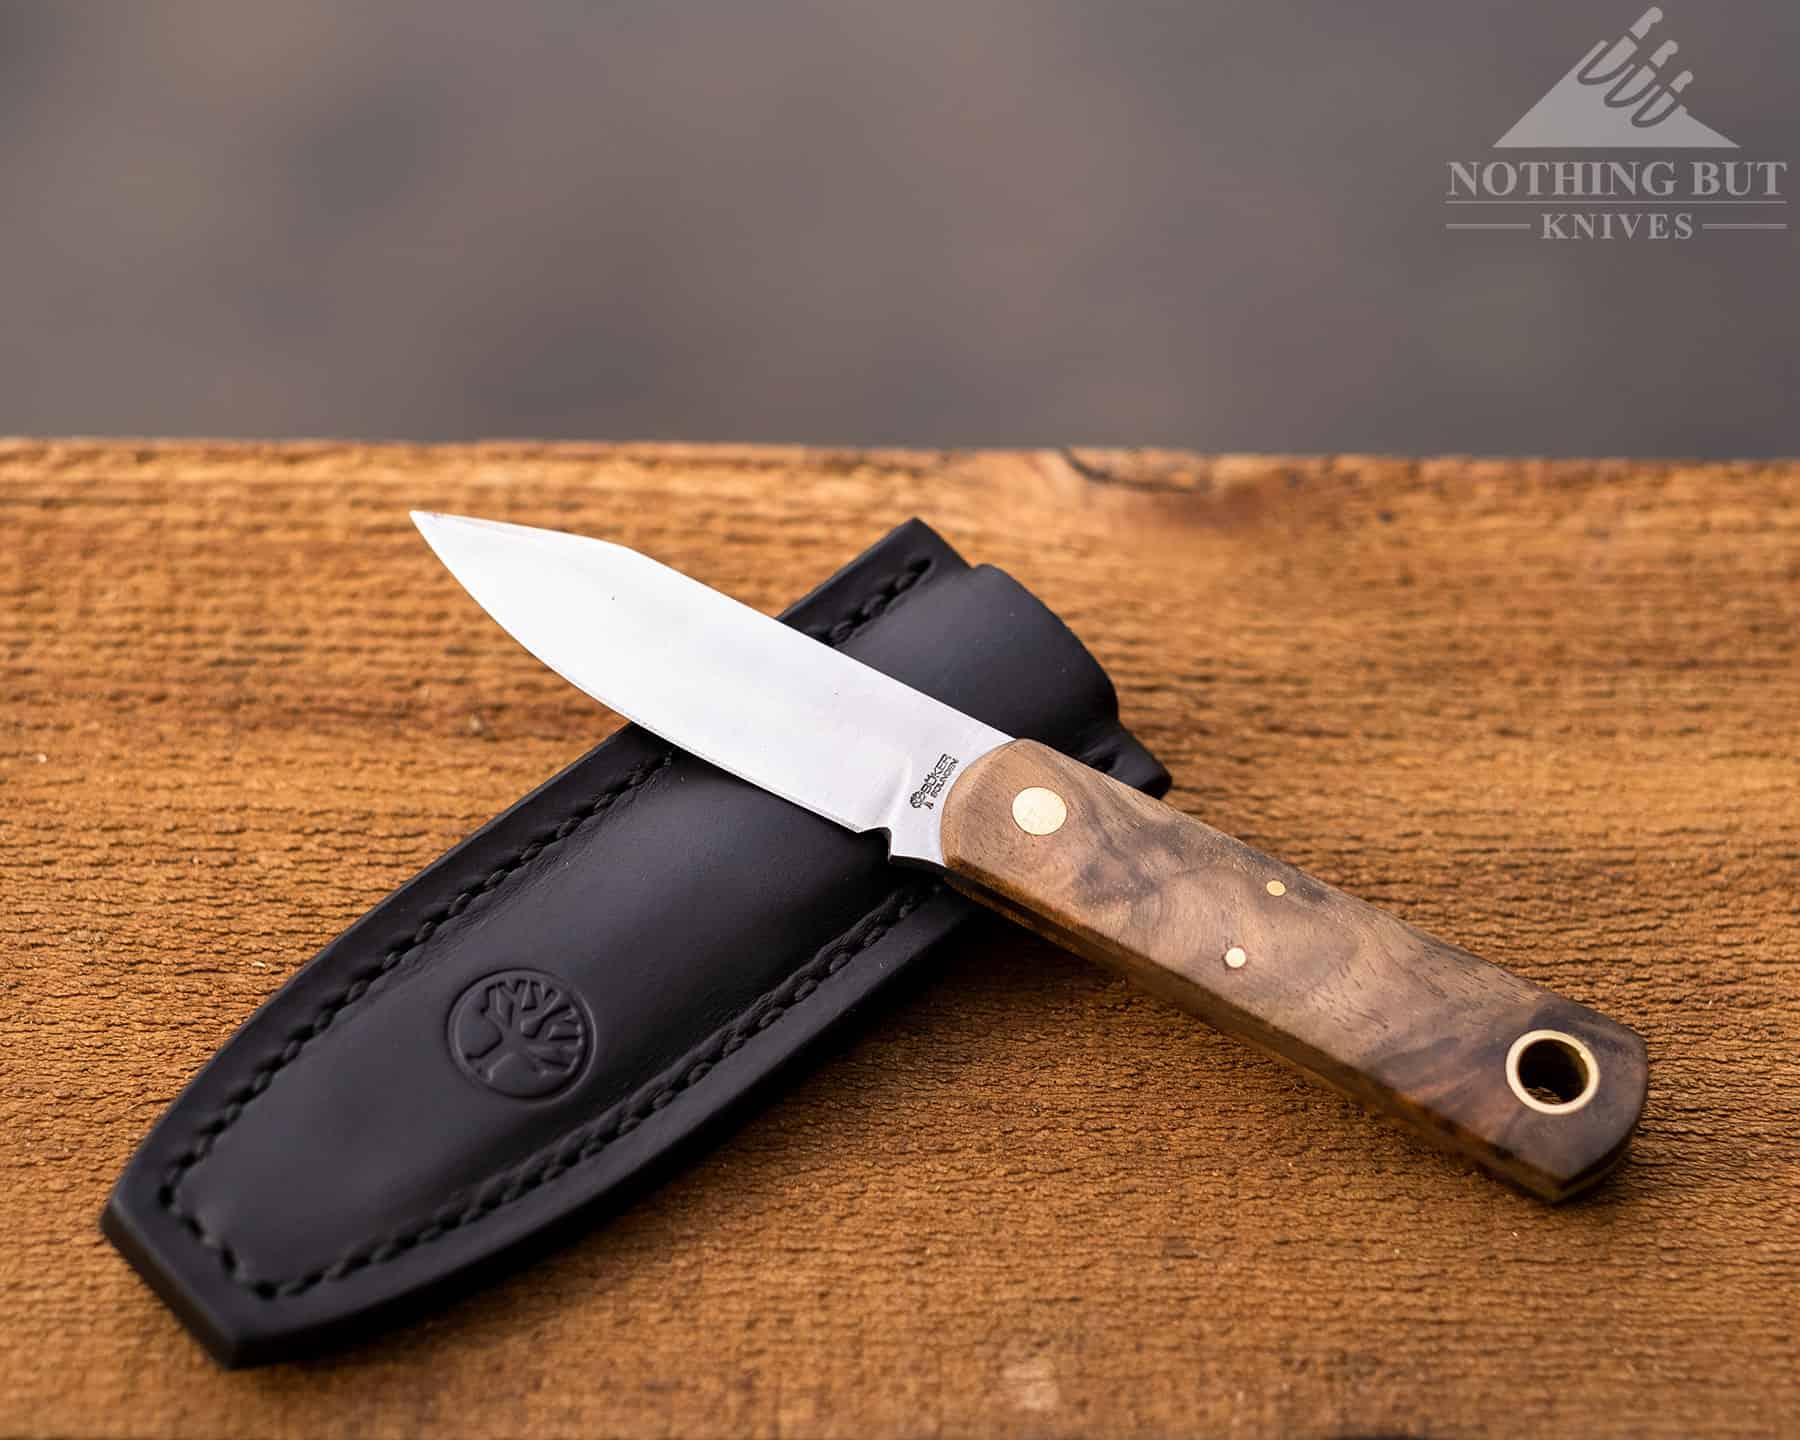 The Boker Barlow Fixed Blade ships with a leather sheath.